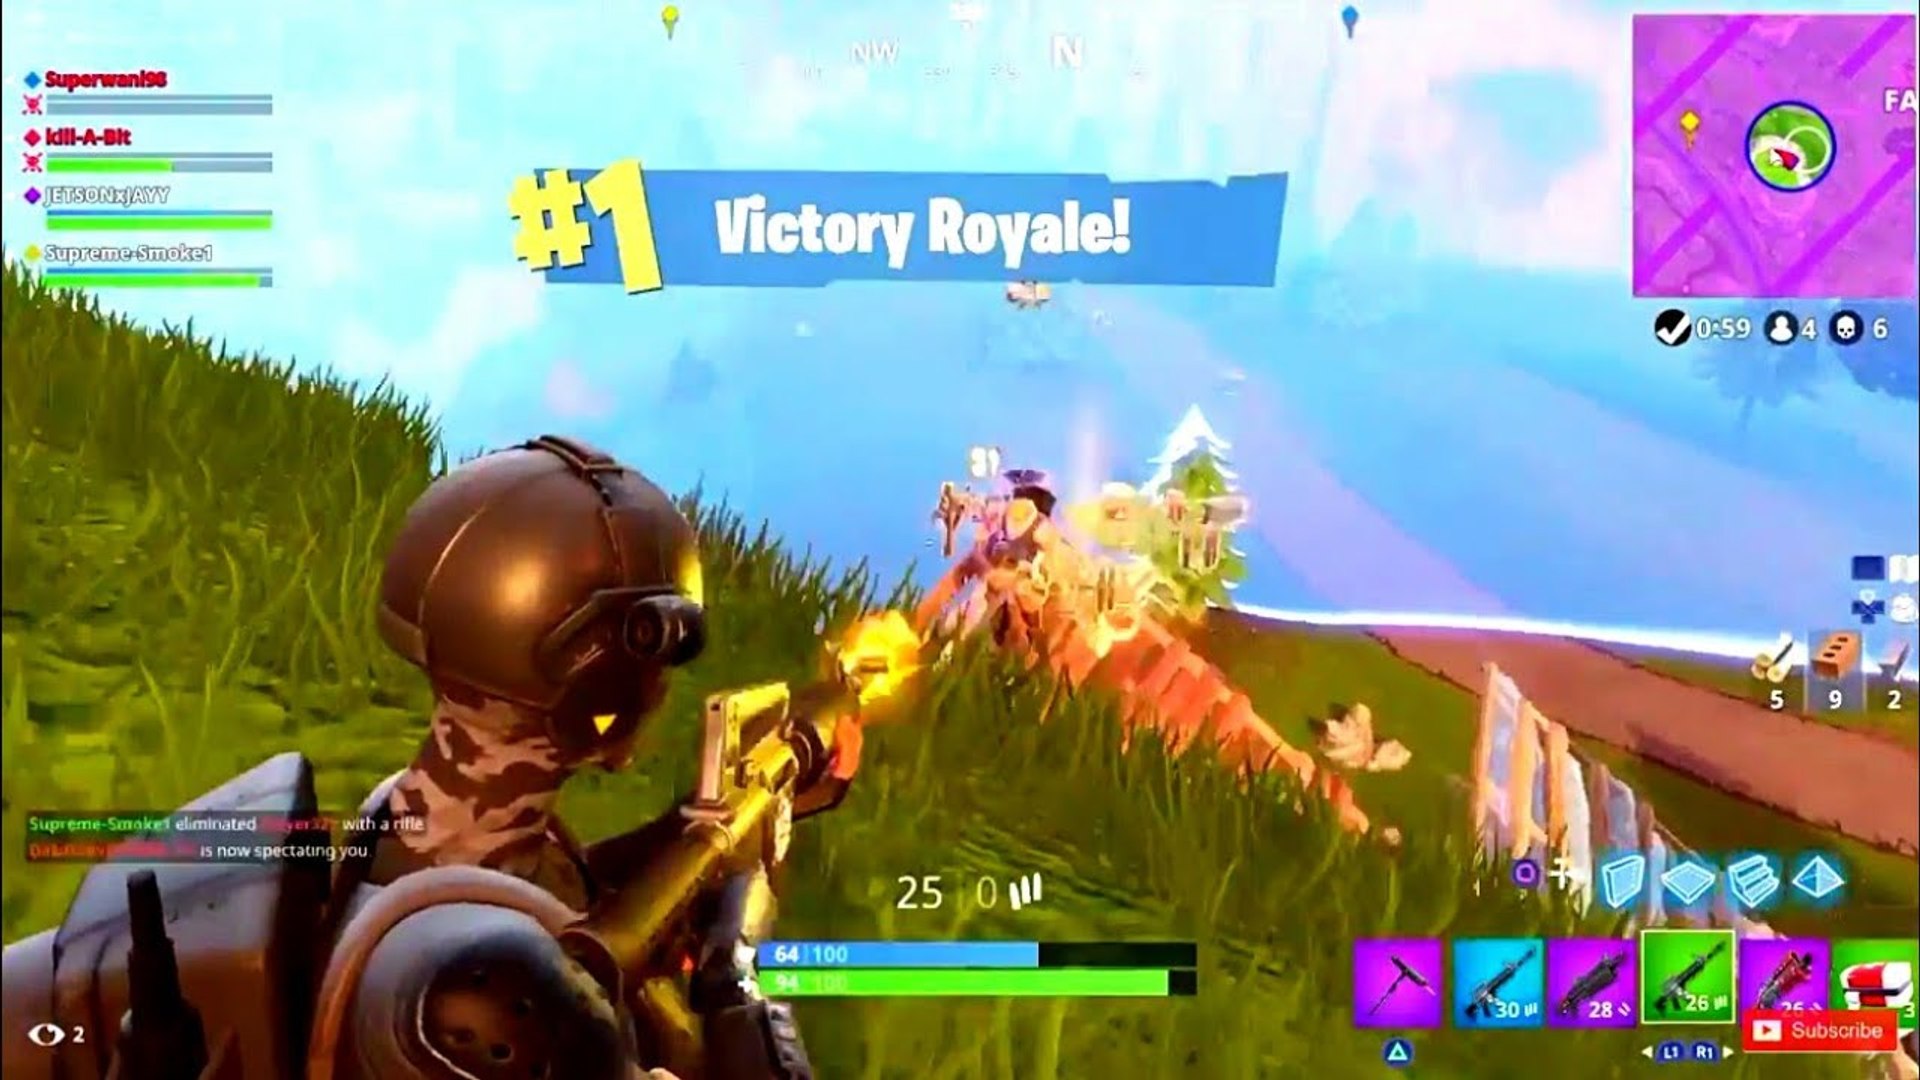 1 Victory Royale 6 Kills Fortnite Battle Royale Season 3 Tier 100 Top Player Gameplay Video Dailymotion